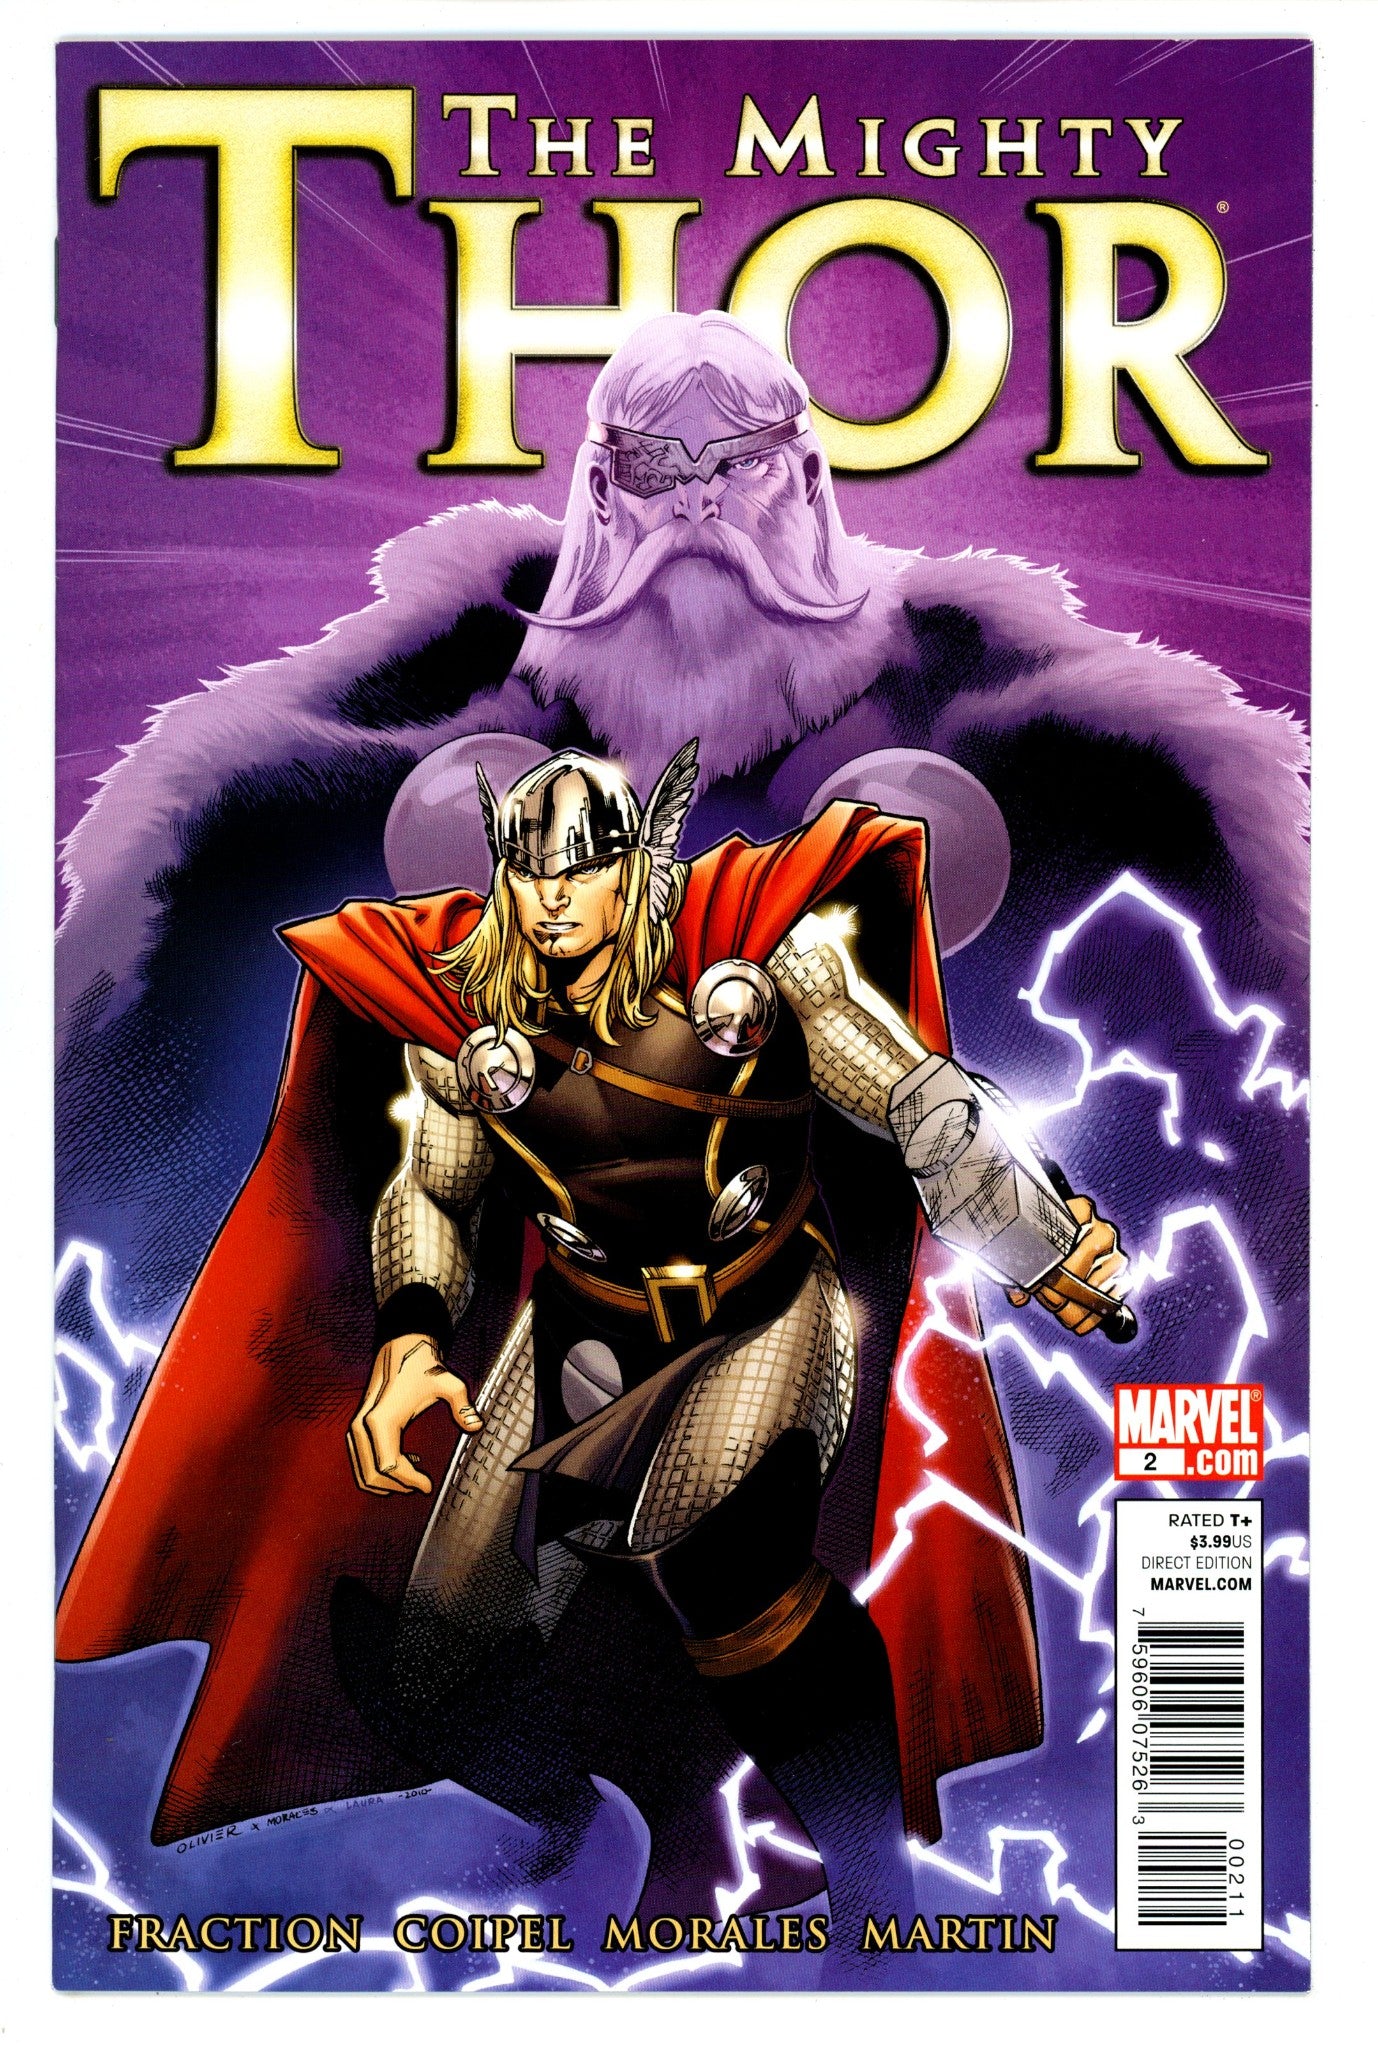 The Mighty Thor Vol 1 2 High Grade (2011) 